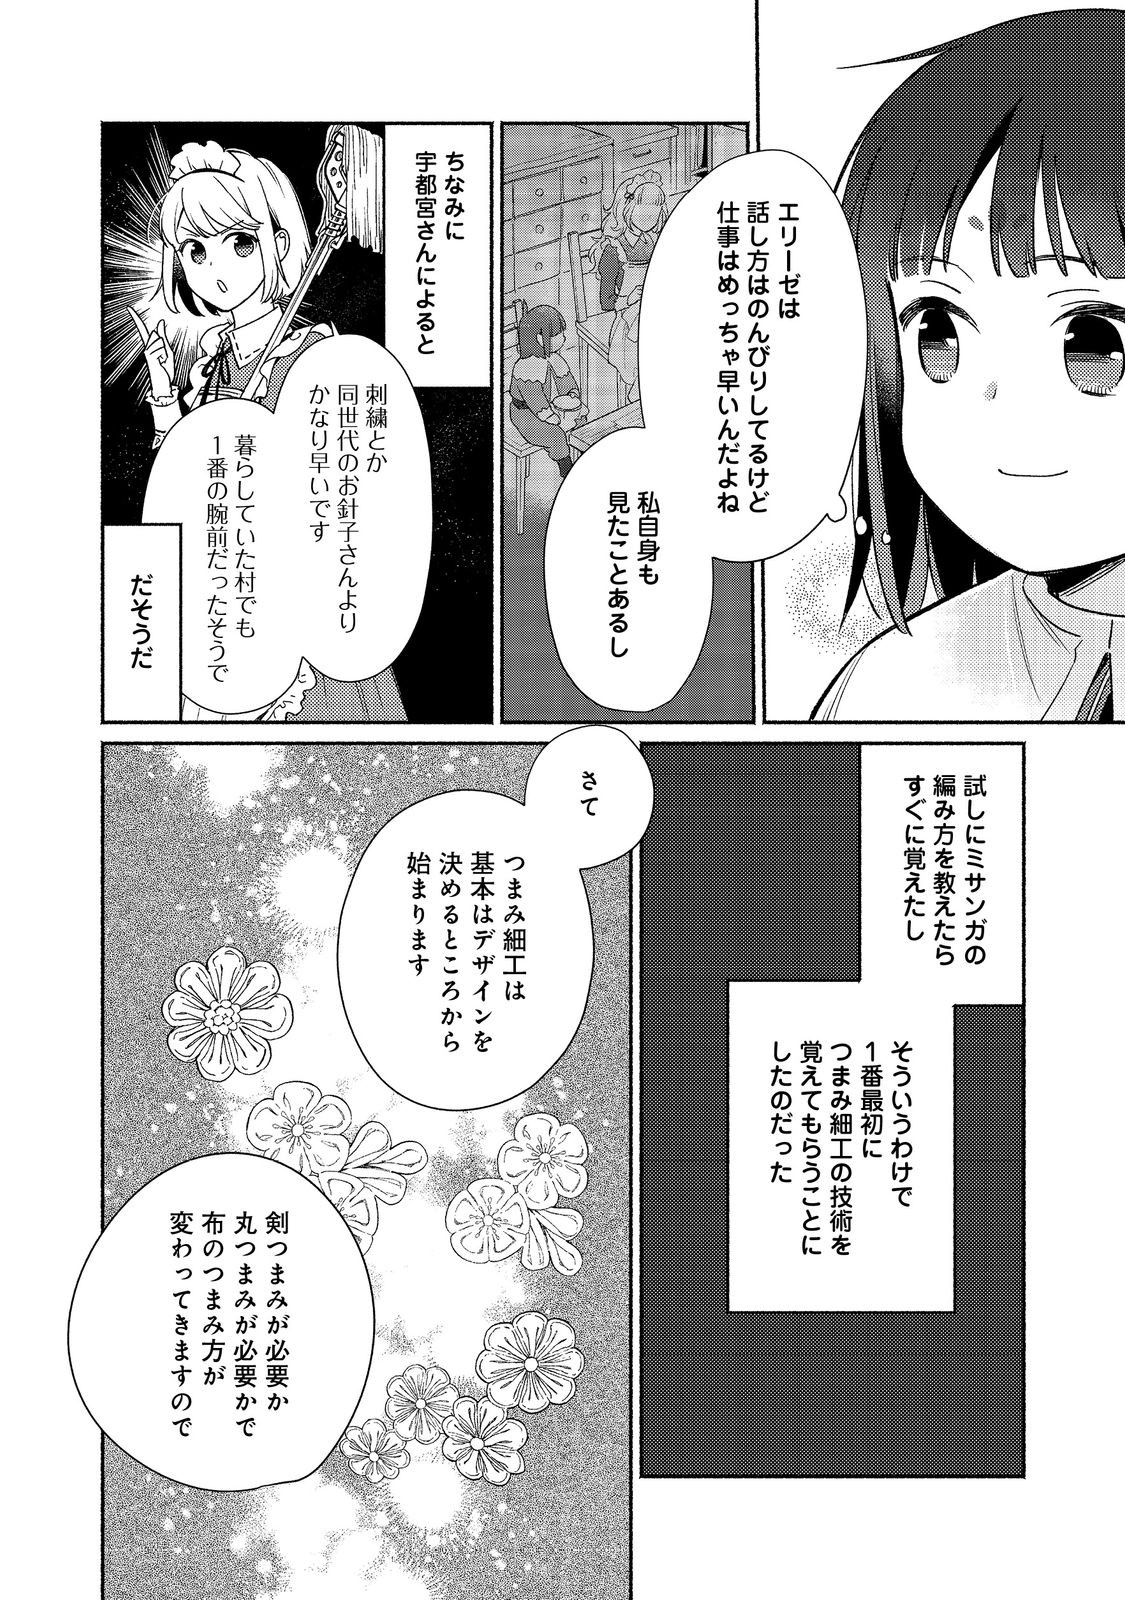 I’m the White Pig Nobleman 第21.1話 - Page 8